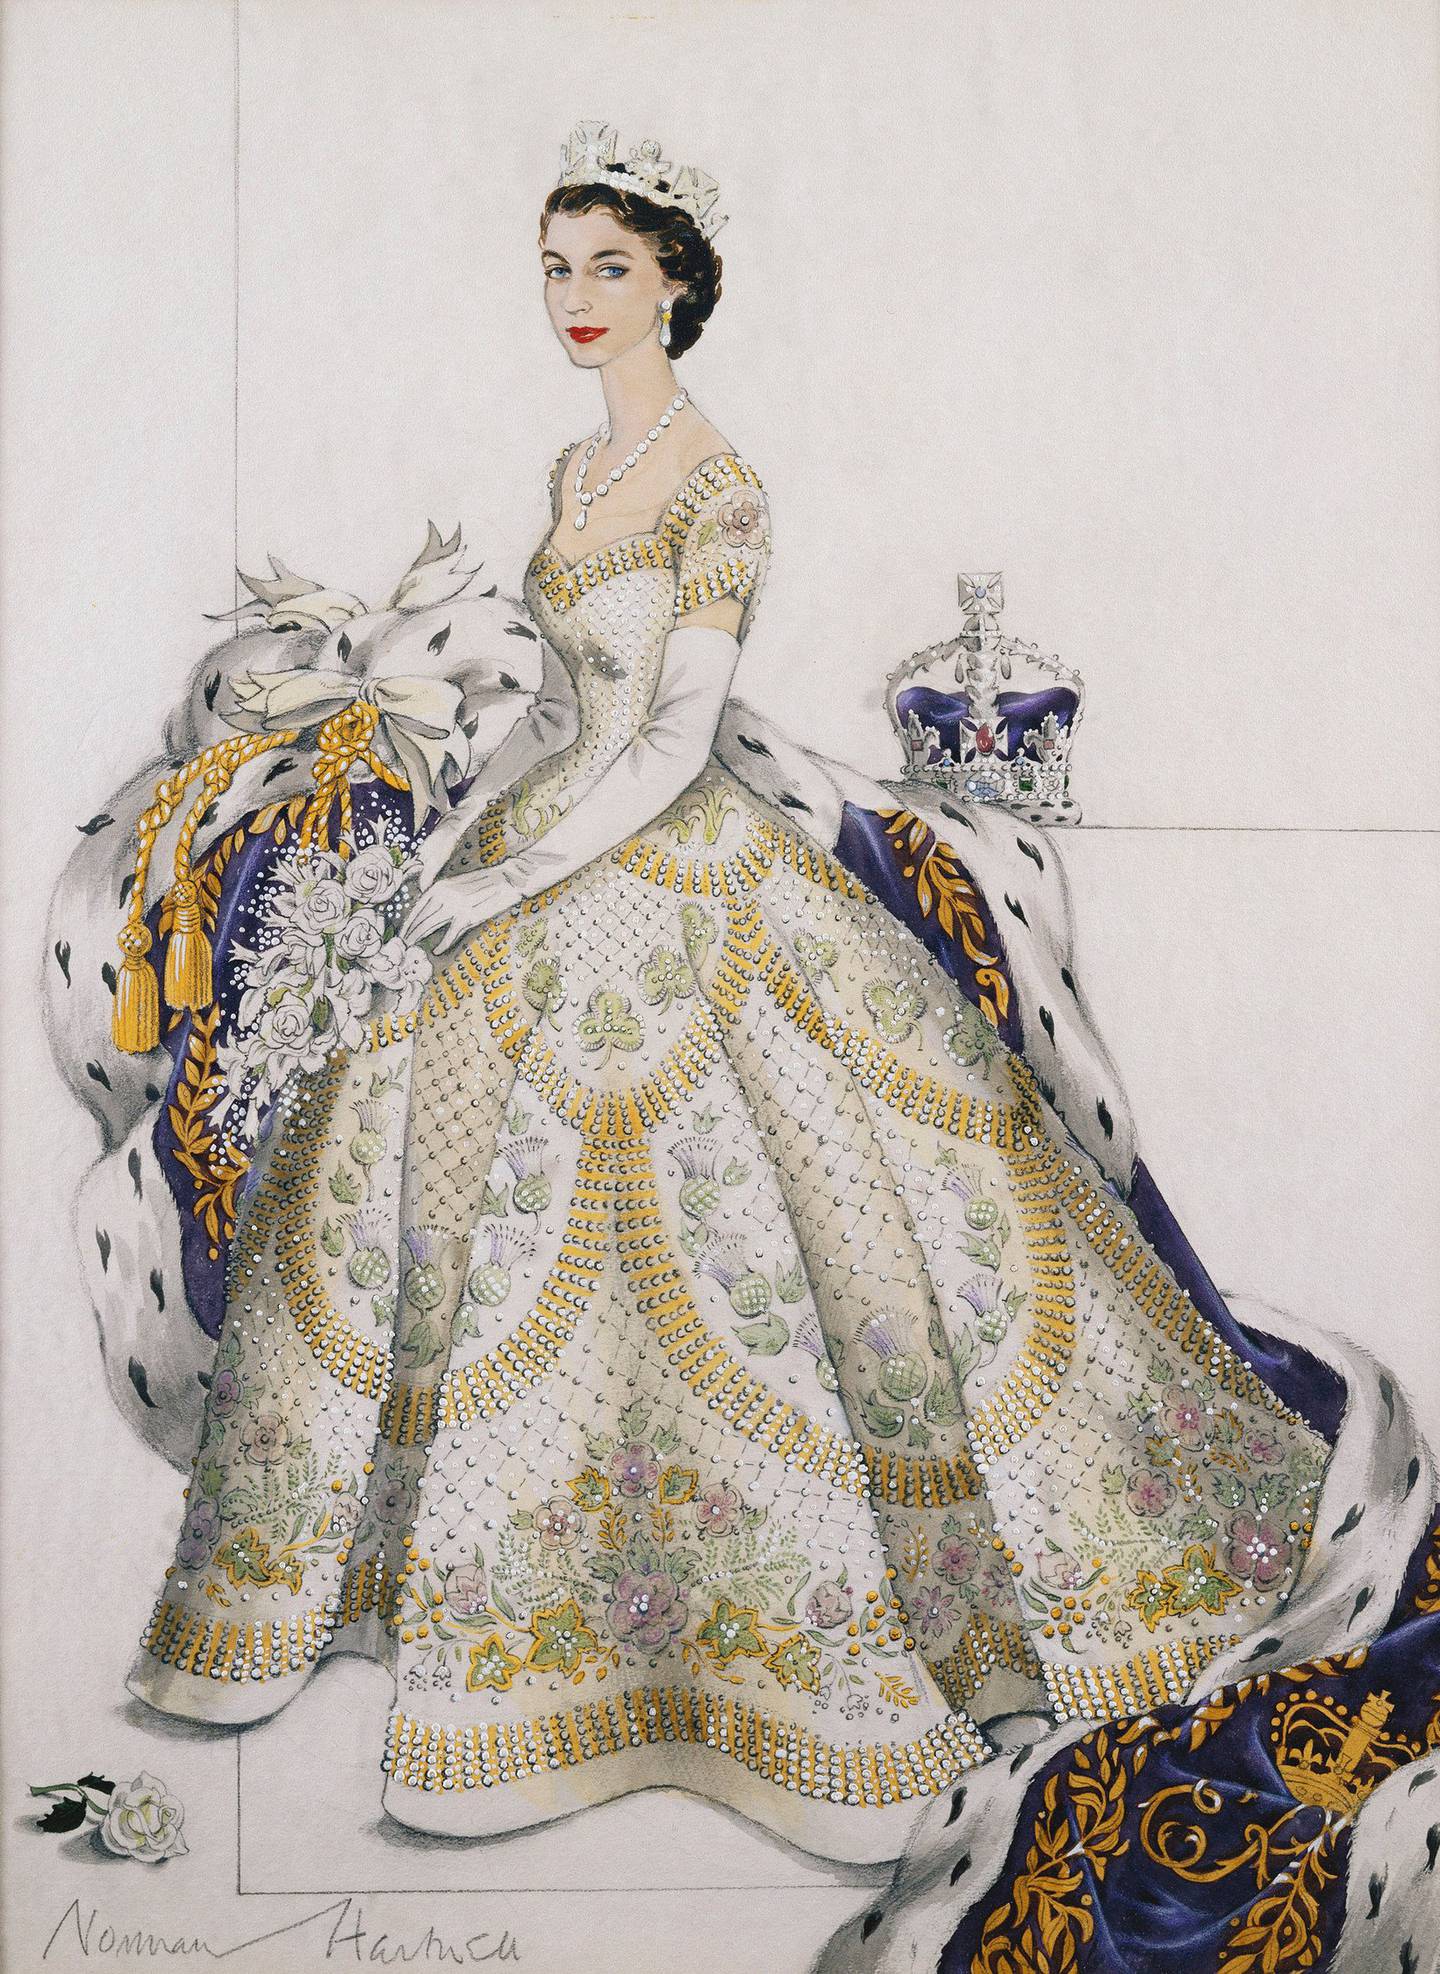 Norman Hartnell's sketch of the design chosen to be the coronation dress. Photo: The Royal Collections